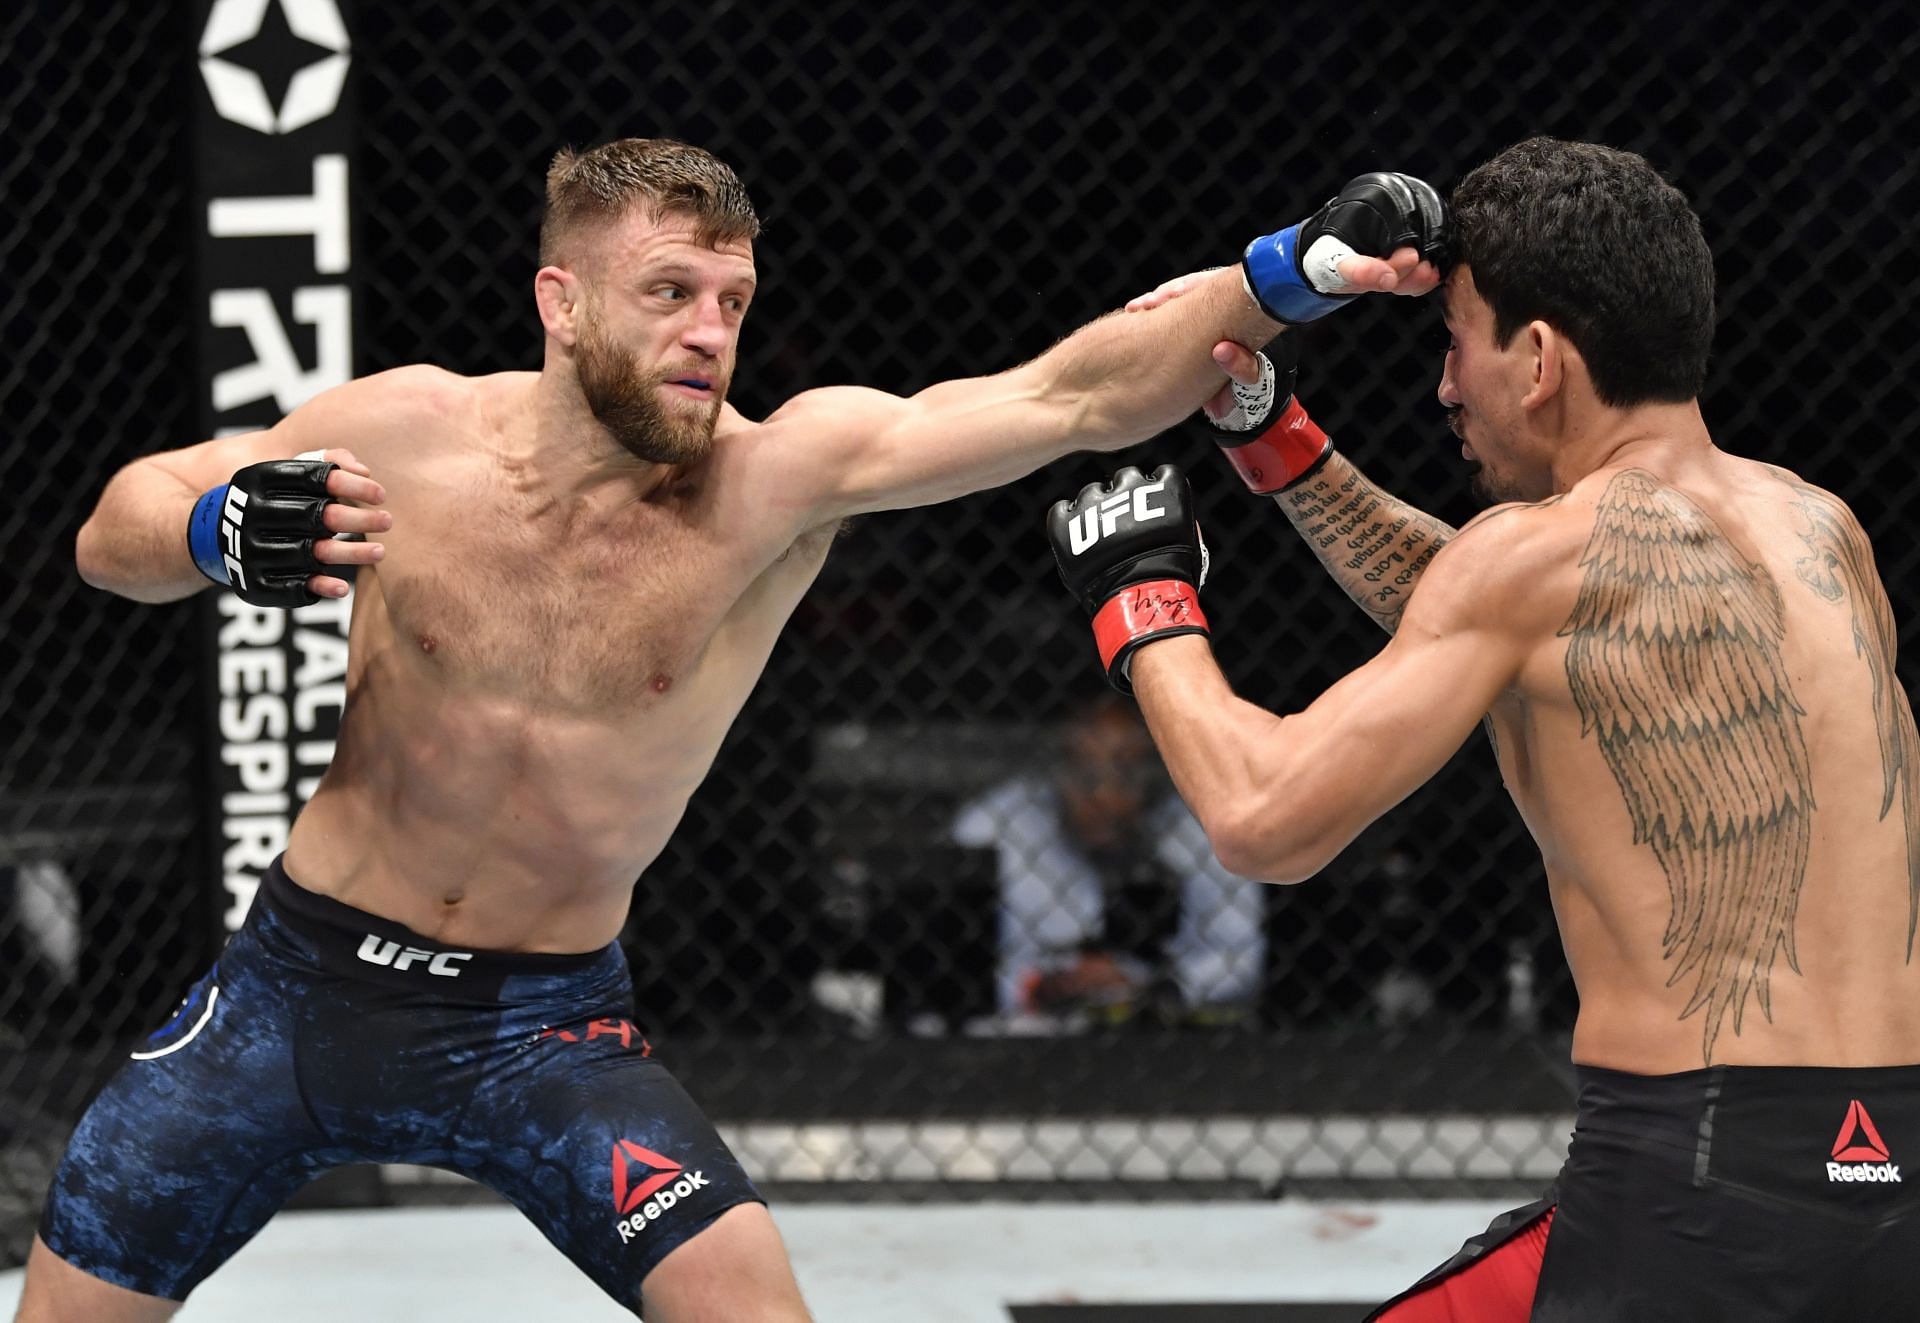 The winner of the upcoming bout between Calvin Kattar and Josh Emmett could test Movsar Evloev